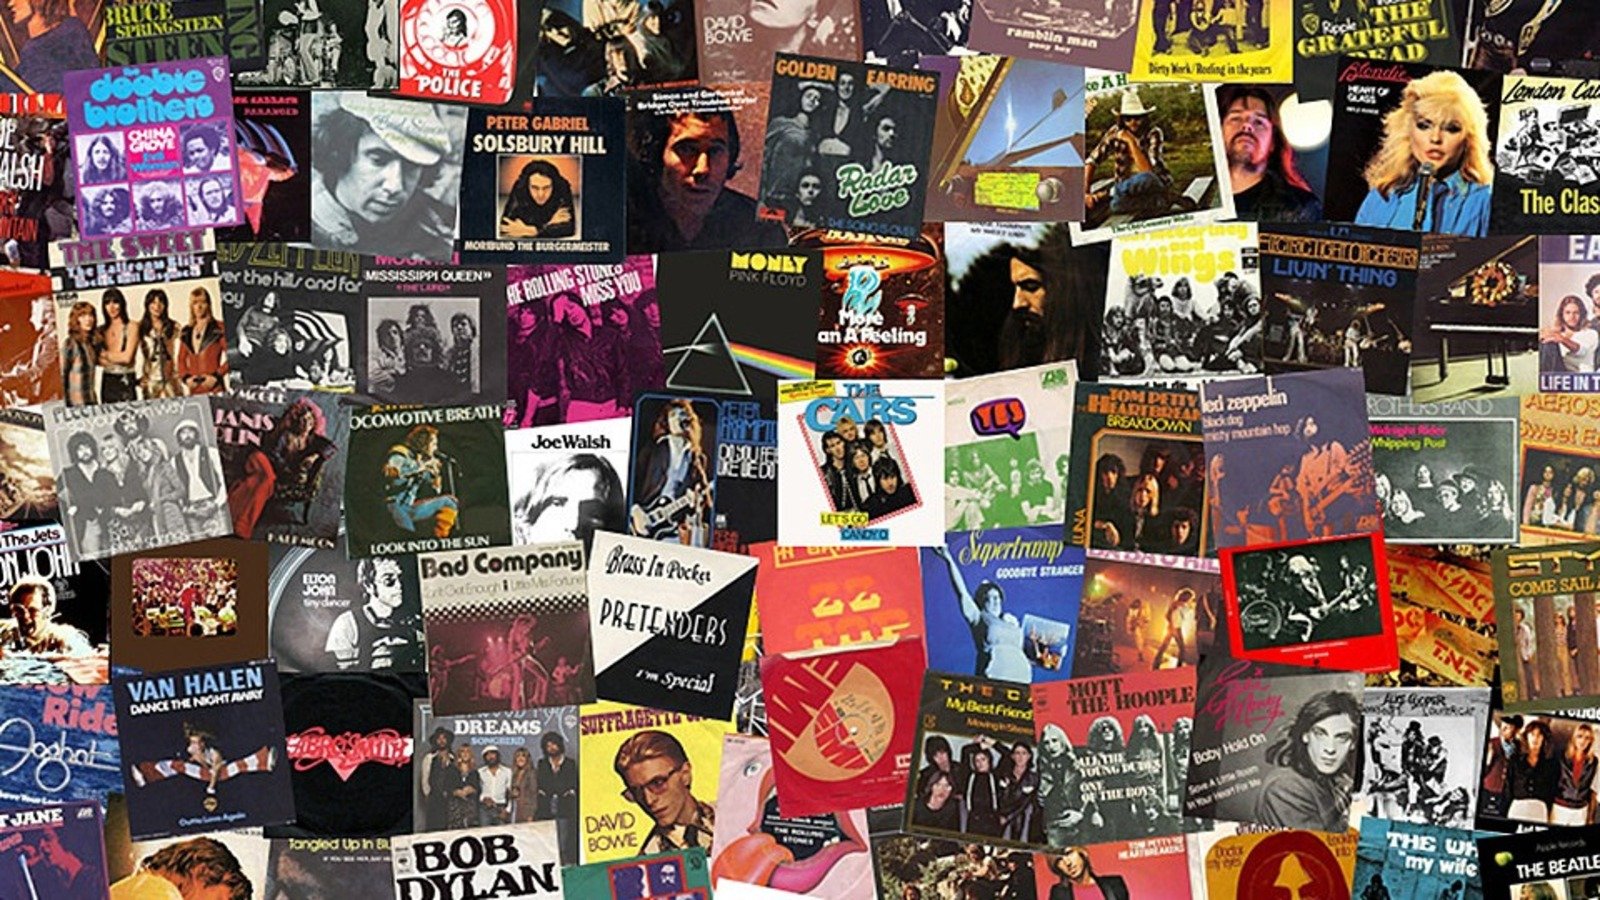 The Top 13 Rock Albums of the '70s